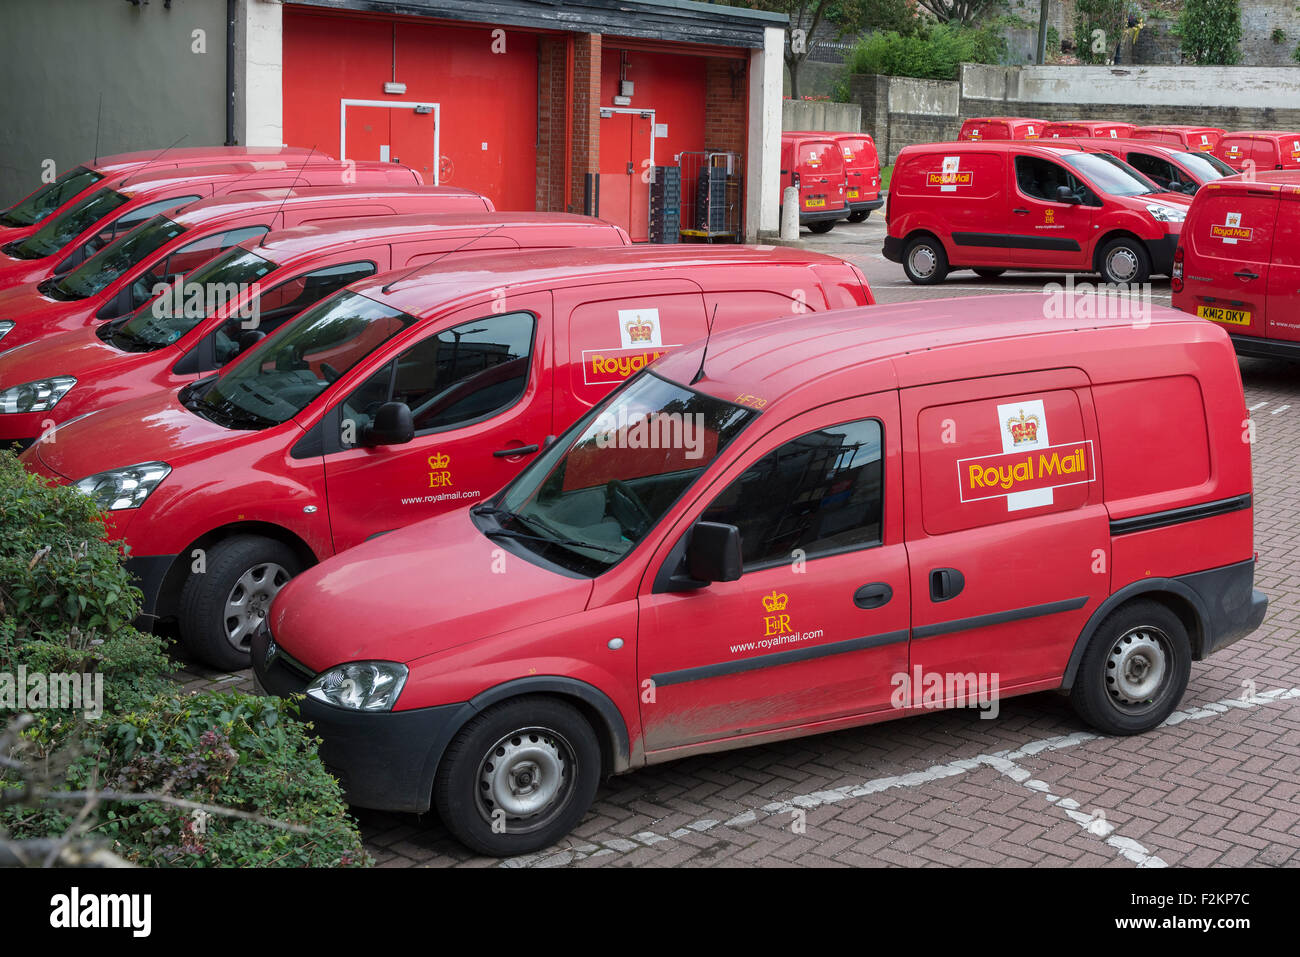 royal-mail-post-office-delivery-vans-fle